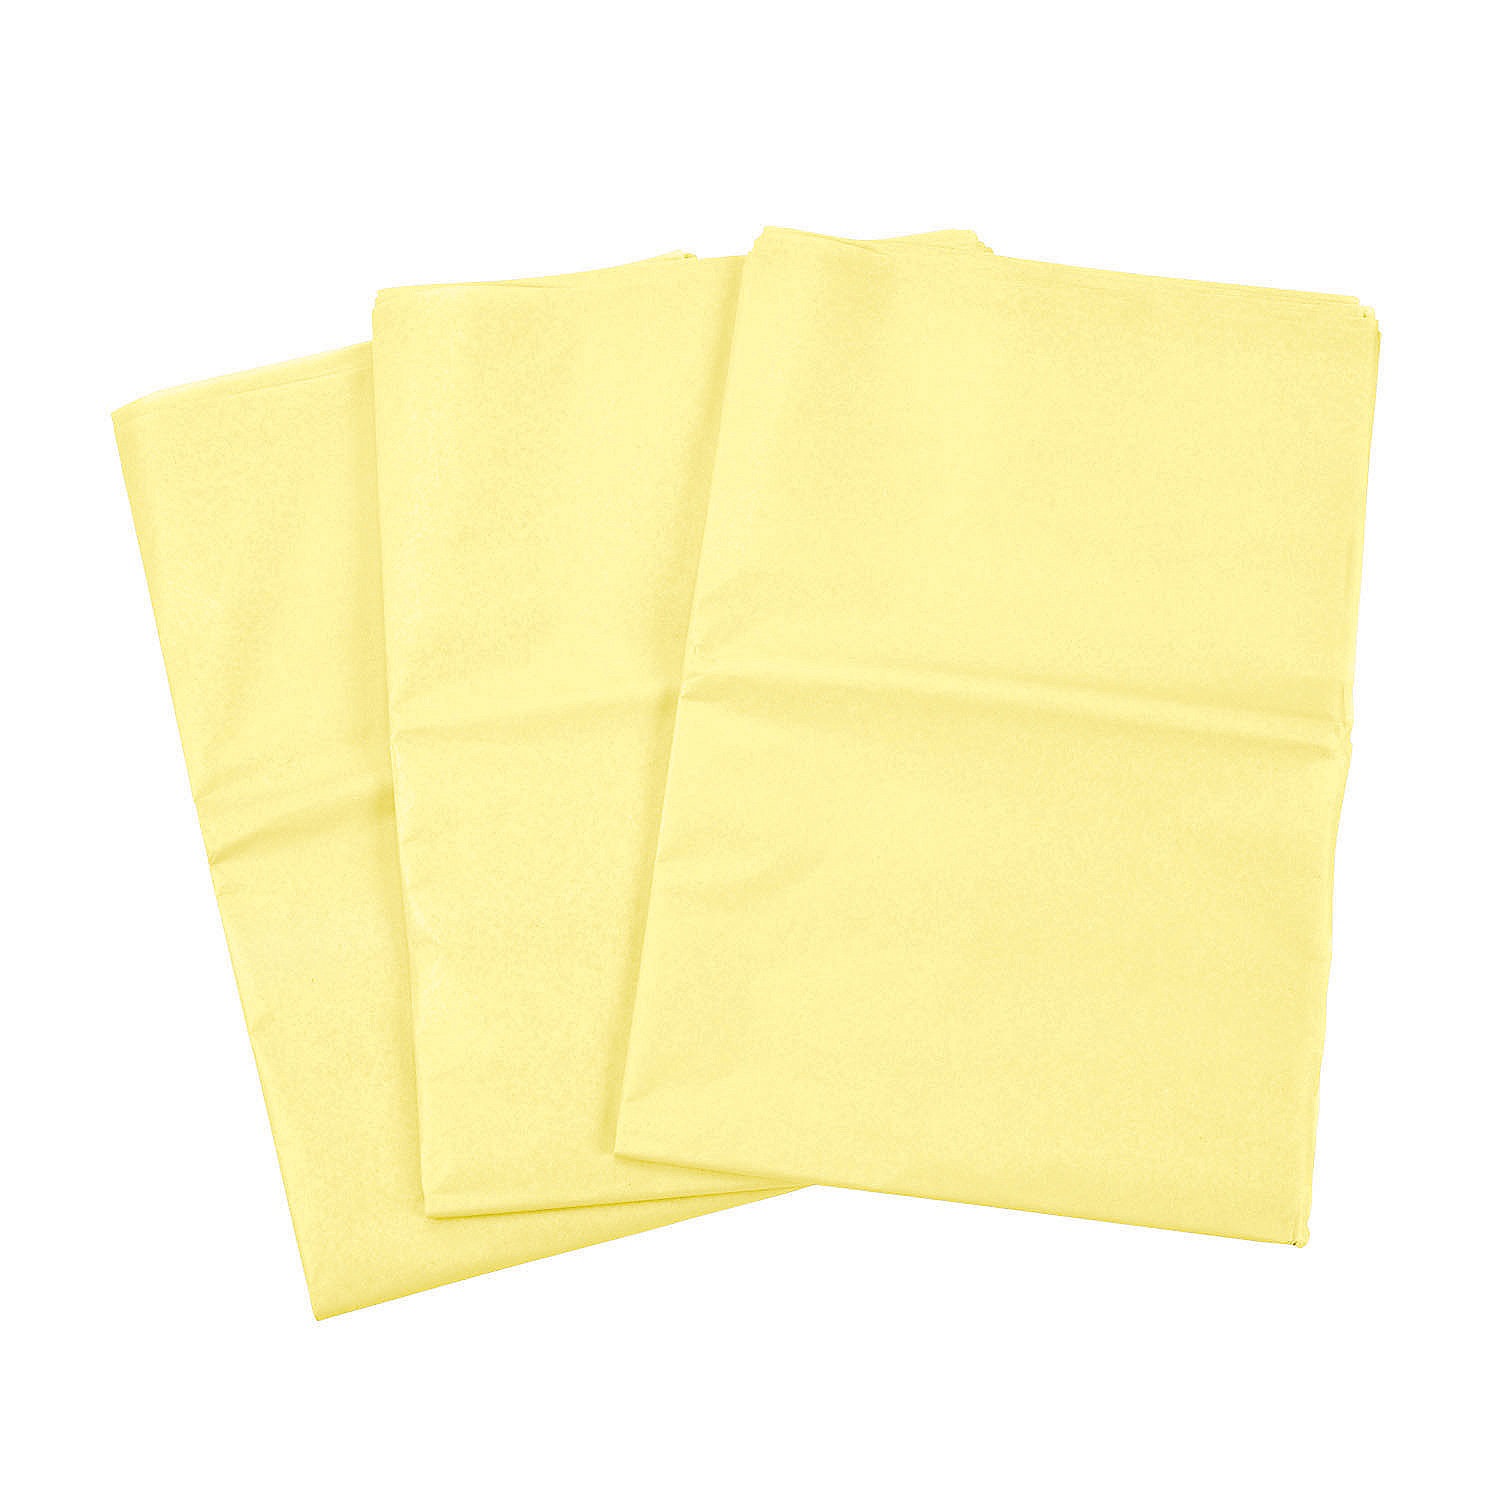 yellow-tissue-paper-sheets-60-pc-_48_7366